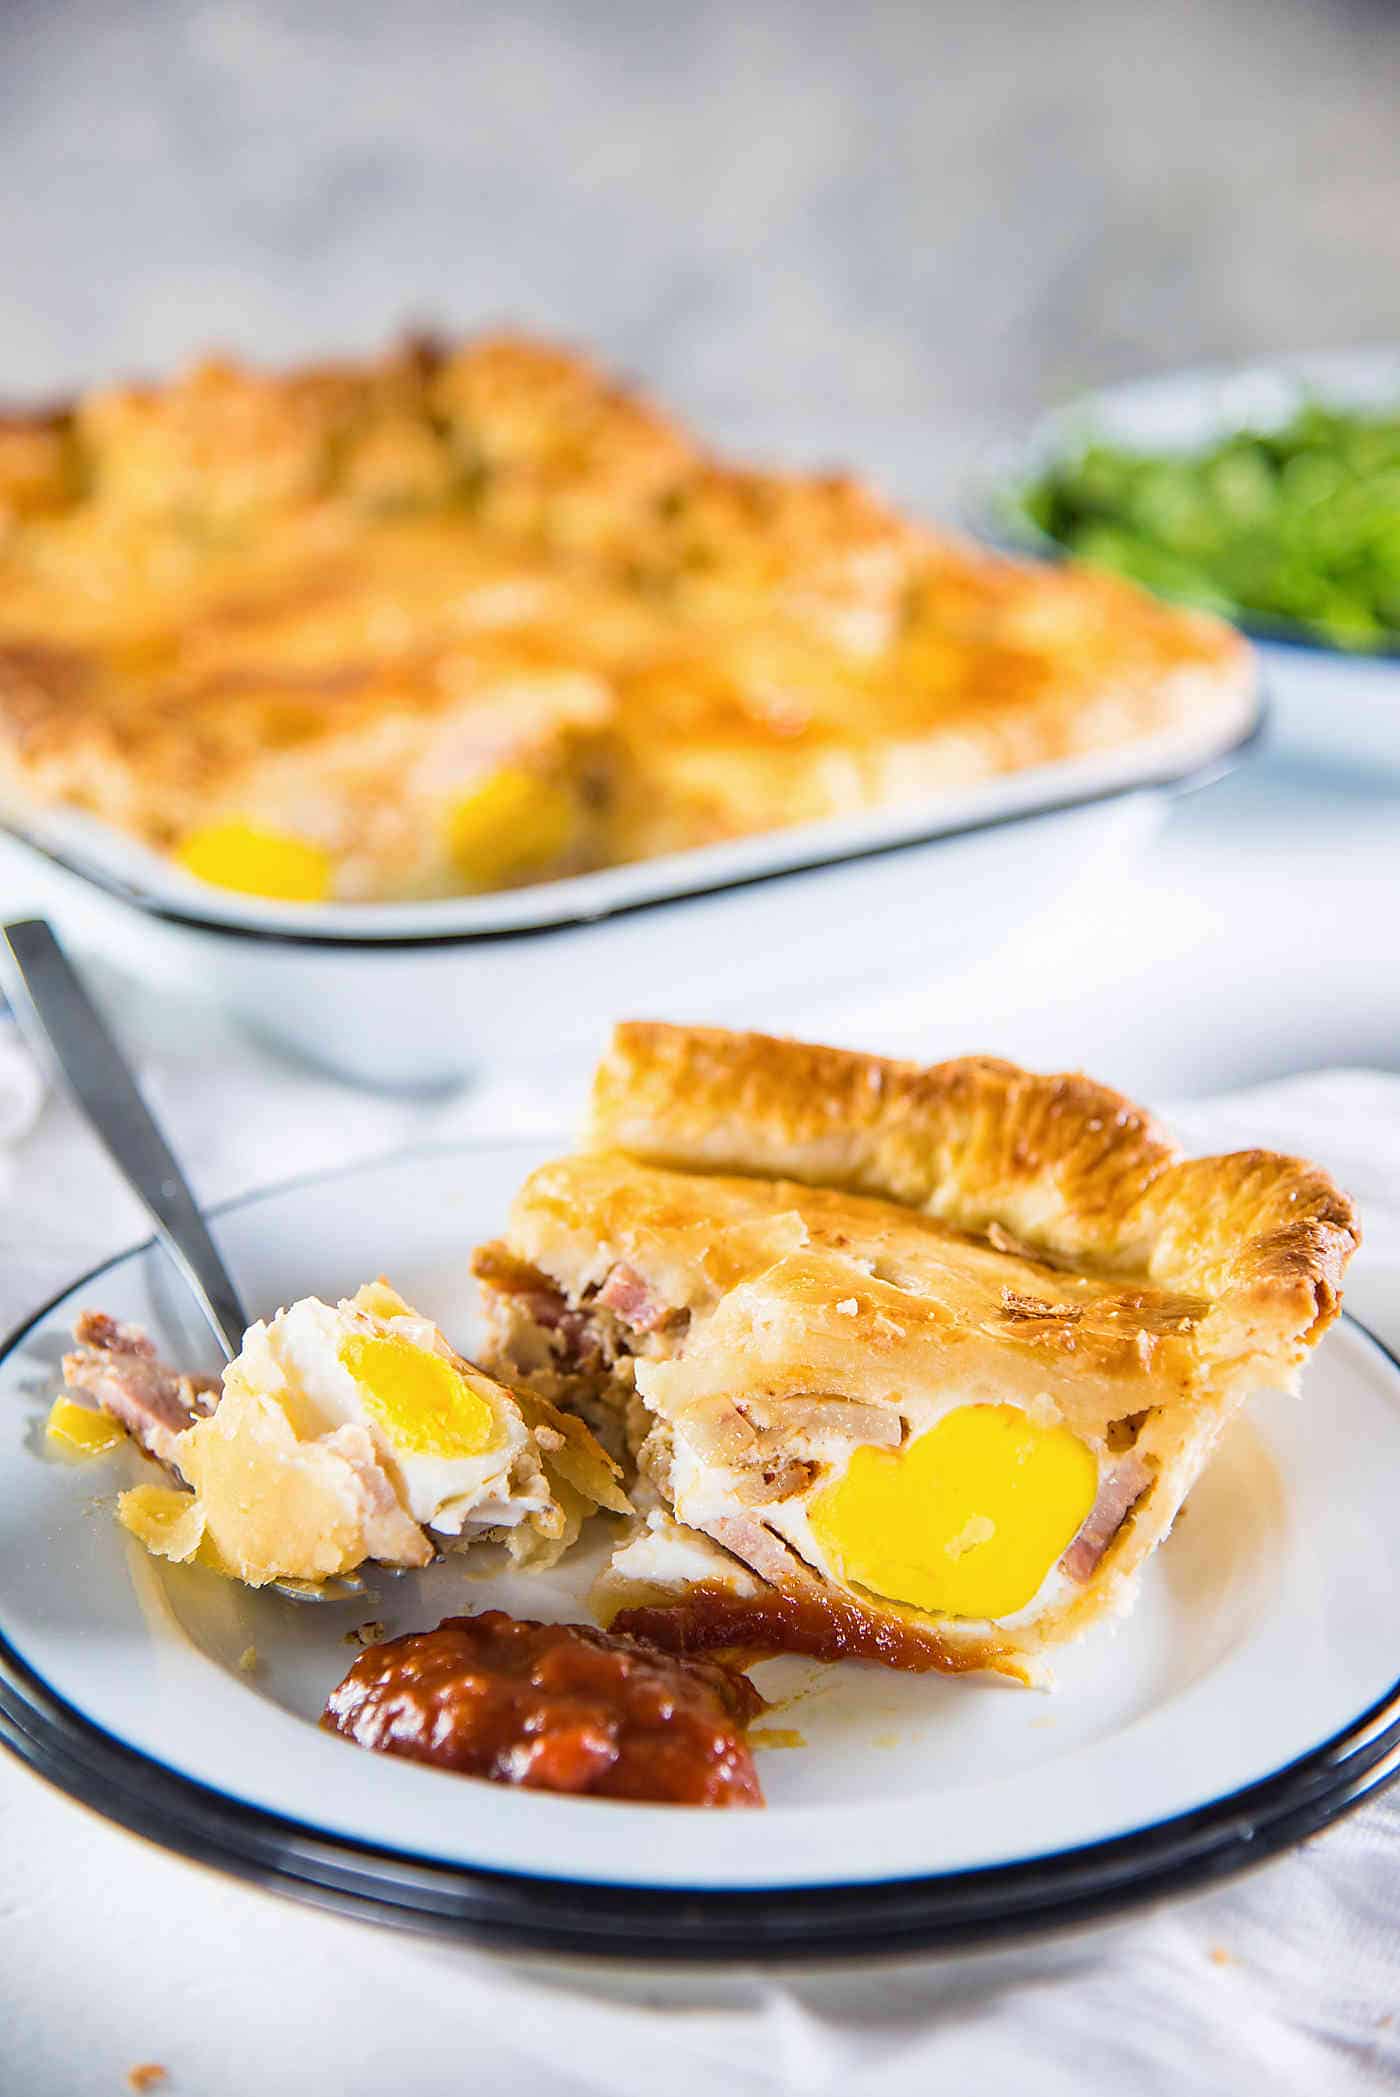 Ultimate Bacon and egg pies (breakfast pies) are a New Zealand classic with smokey bacon and eggs, leeks, cheese and flaky puff pastry! Perfect for breakfast, brunch or even as breakfast for dinner!